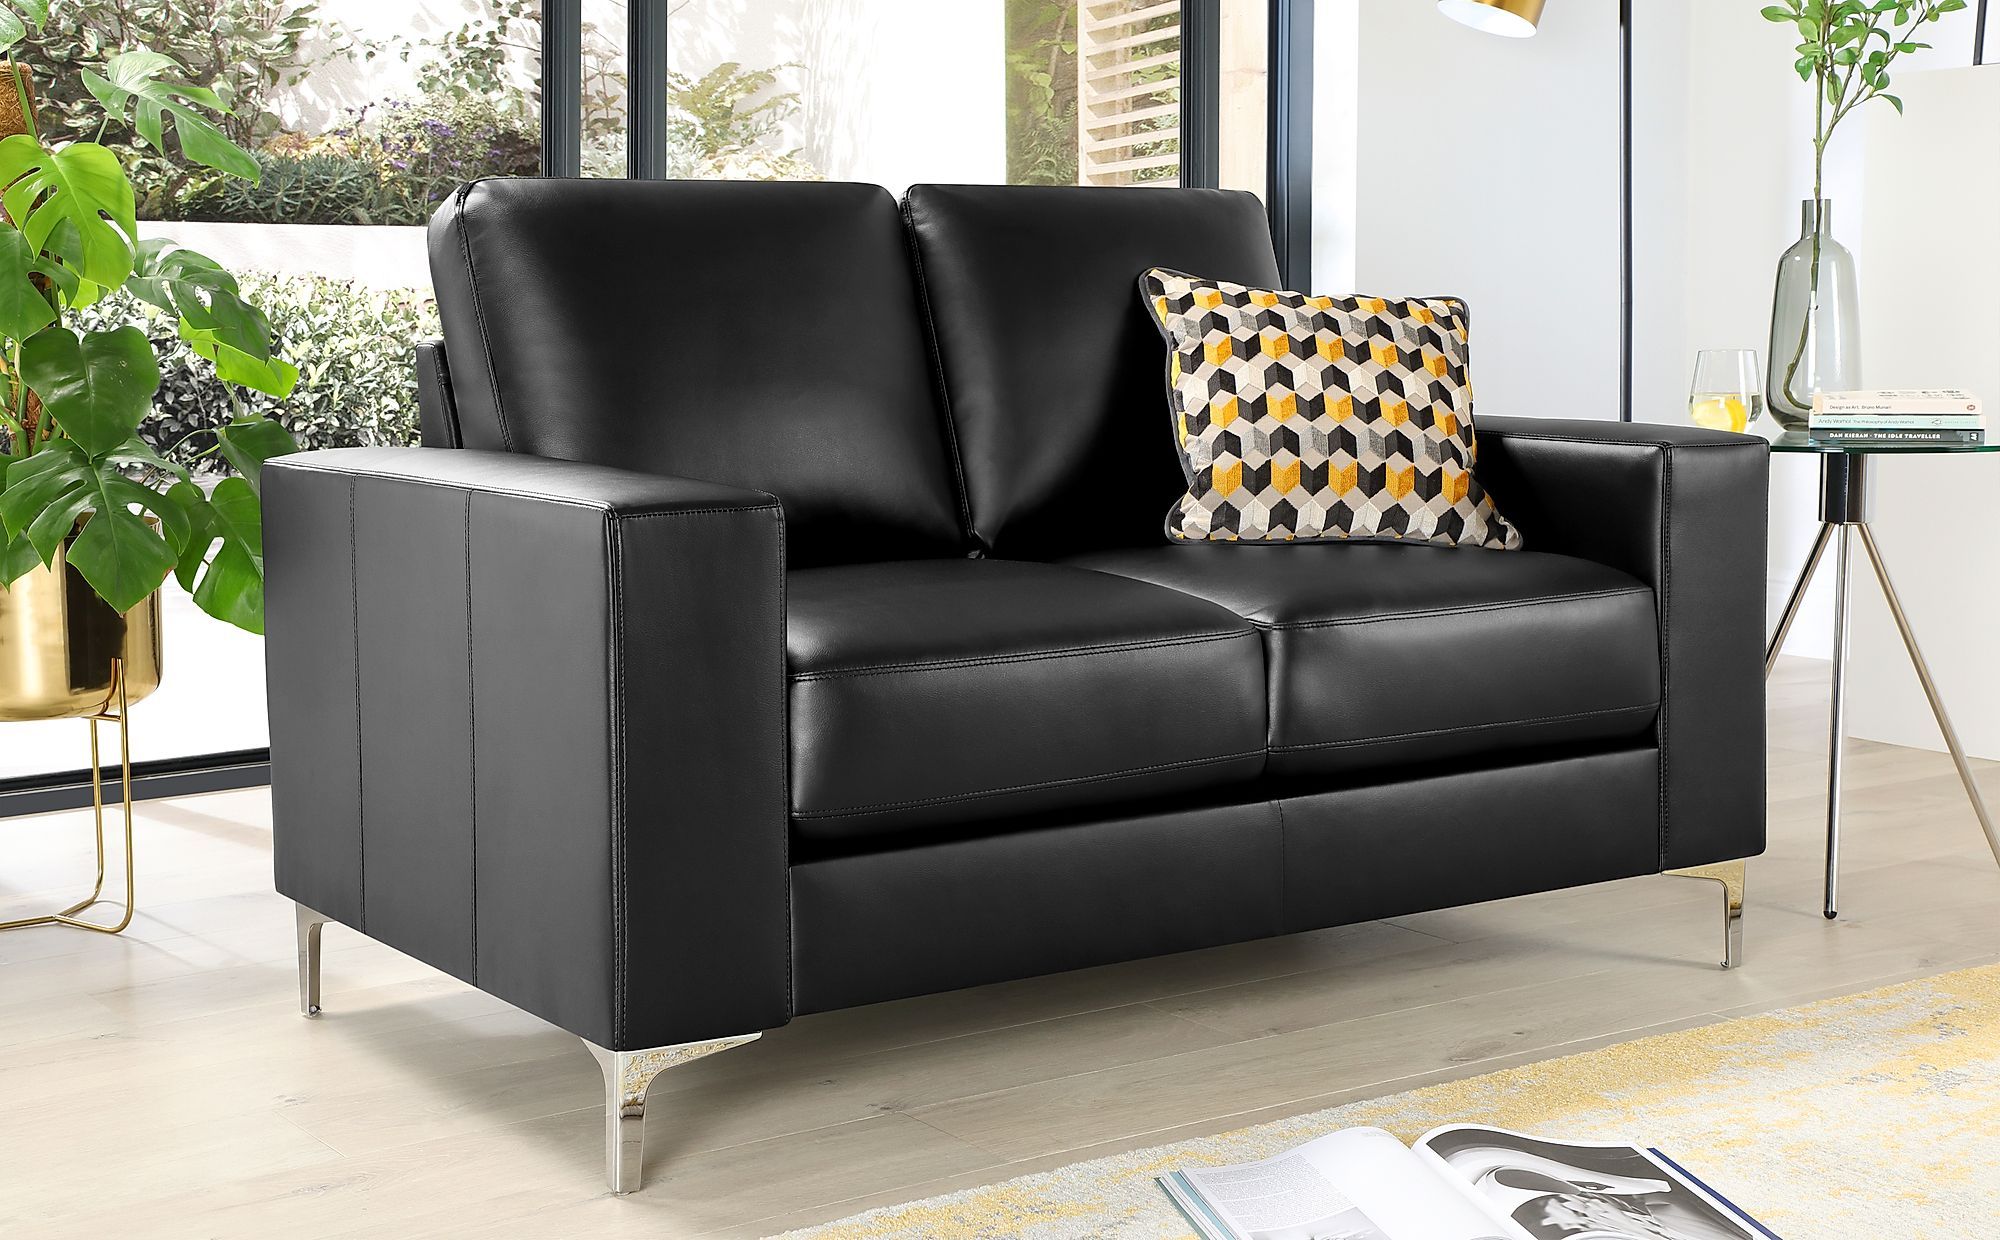 Baltimore Black Leather 2 Seater Sofa | Furniture Choice With Regard To 2 Seater Black Velvet Sofa Beds (View 14 of 20)